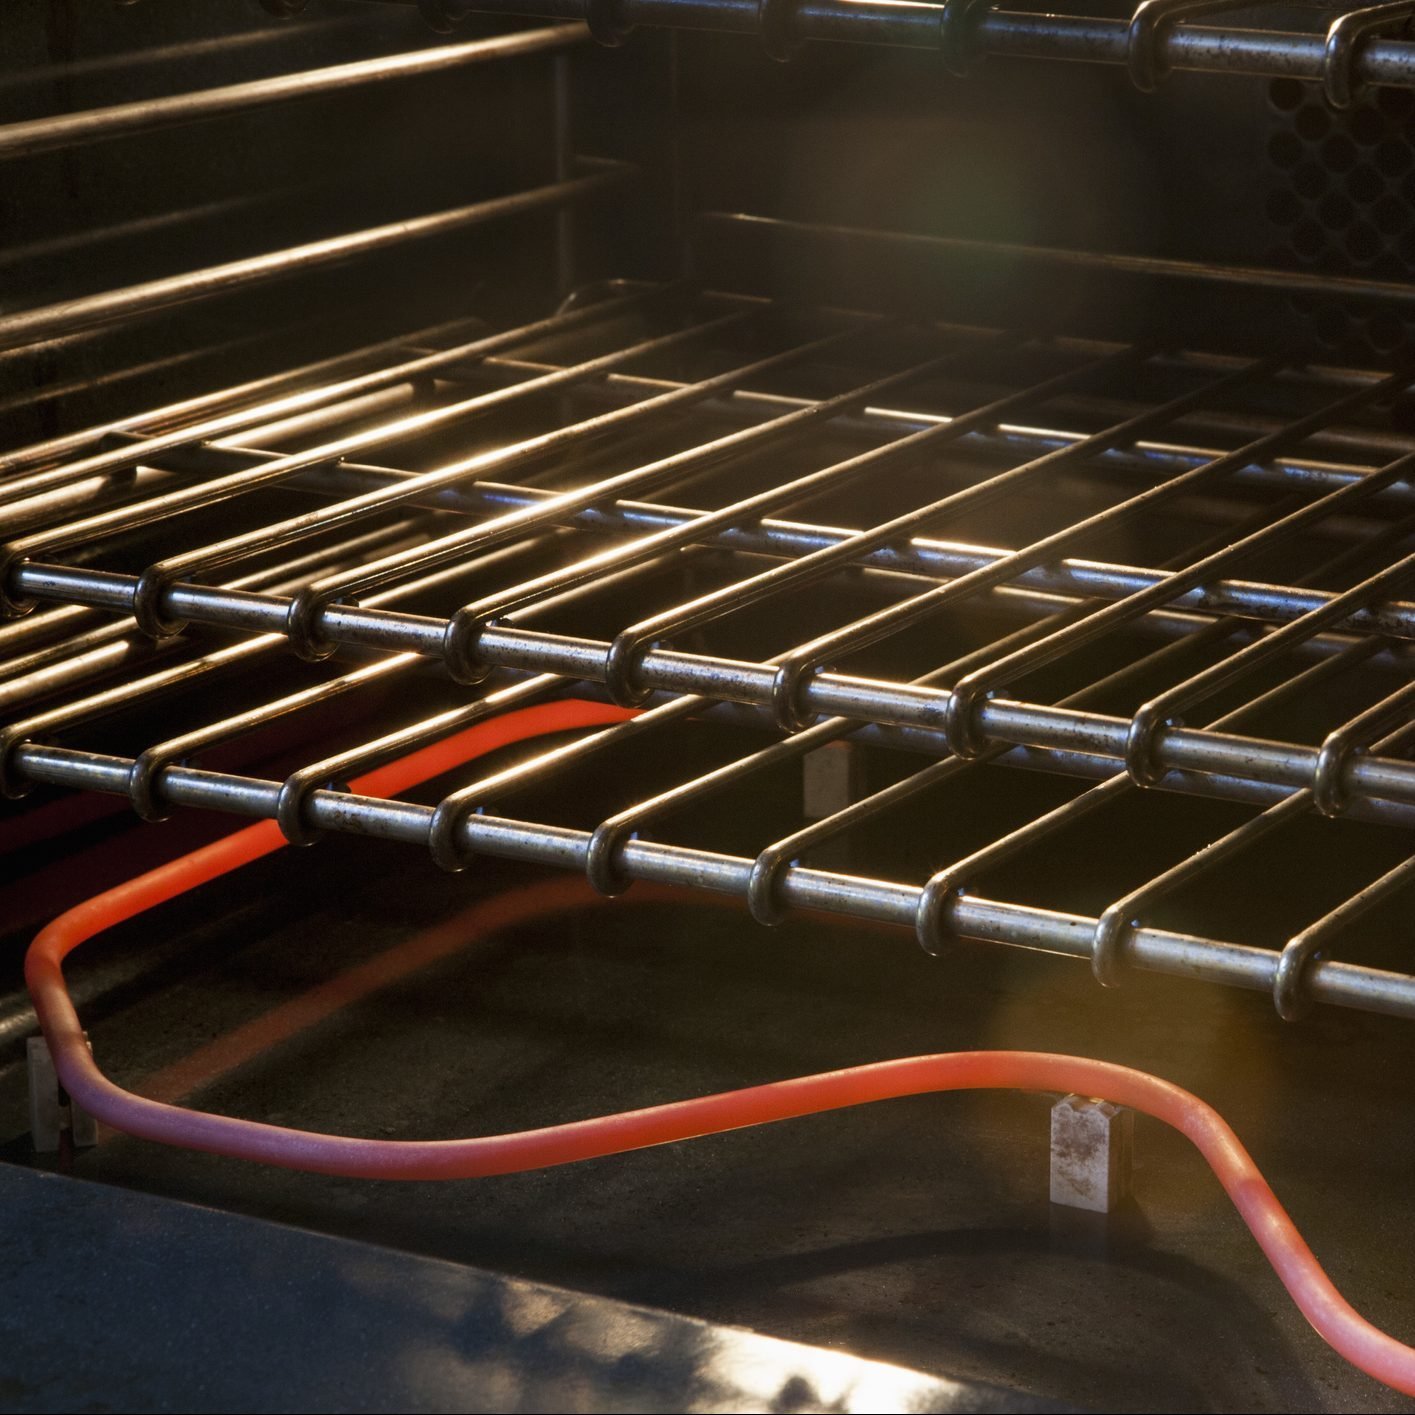 How To Replace the Heating Element in an Electric Oven